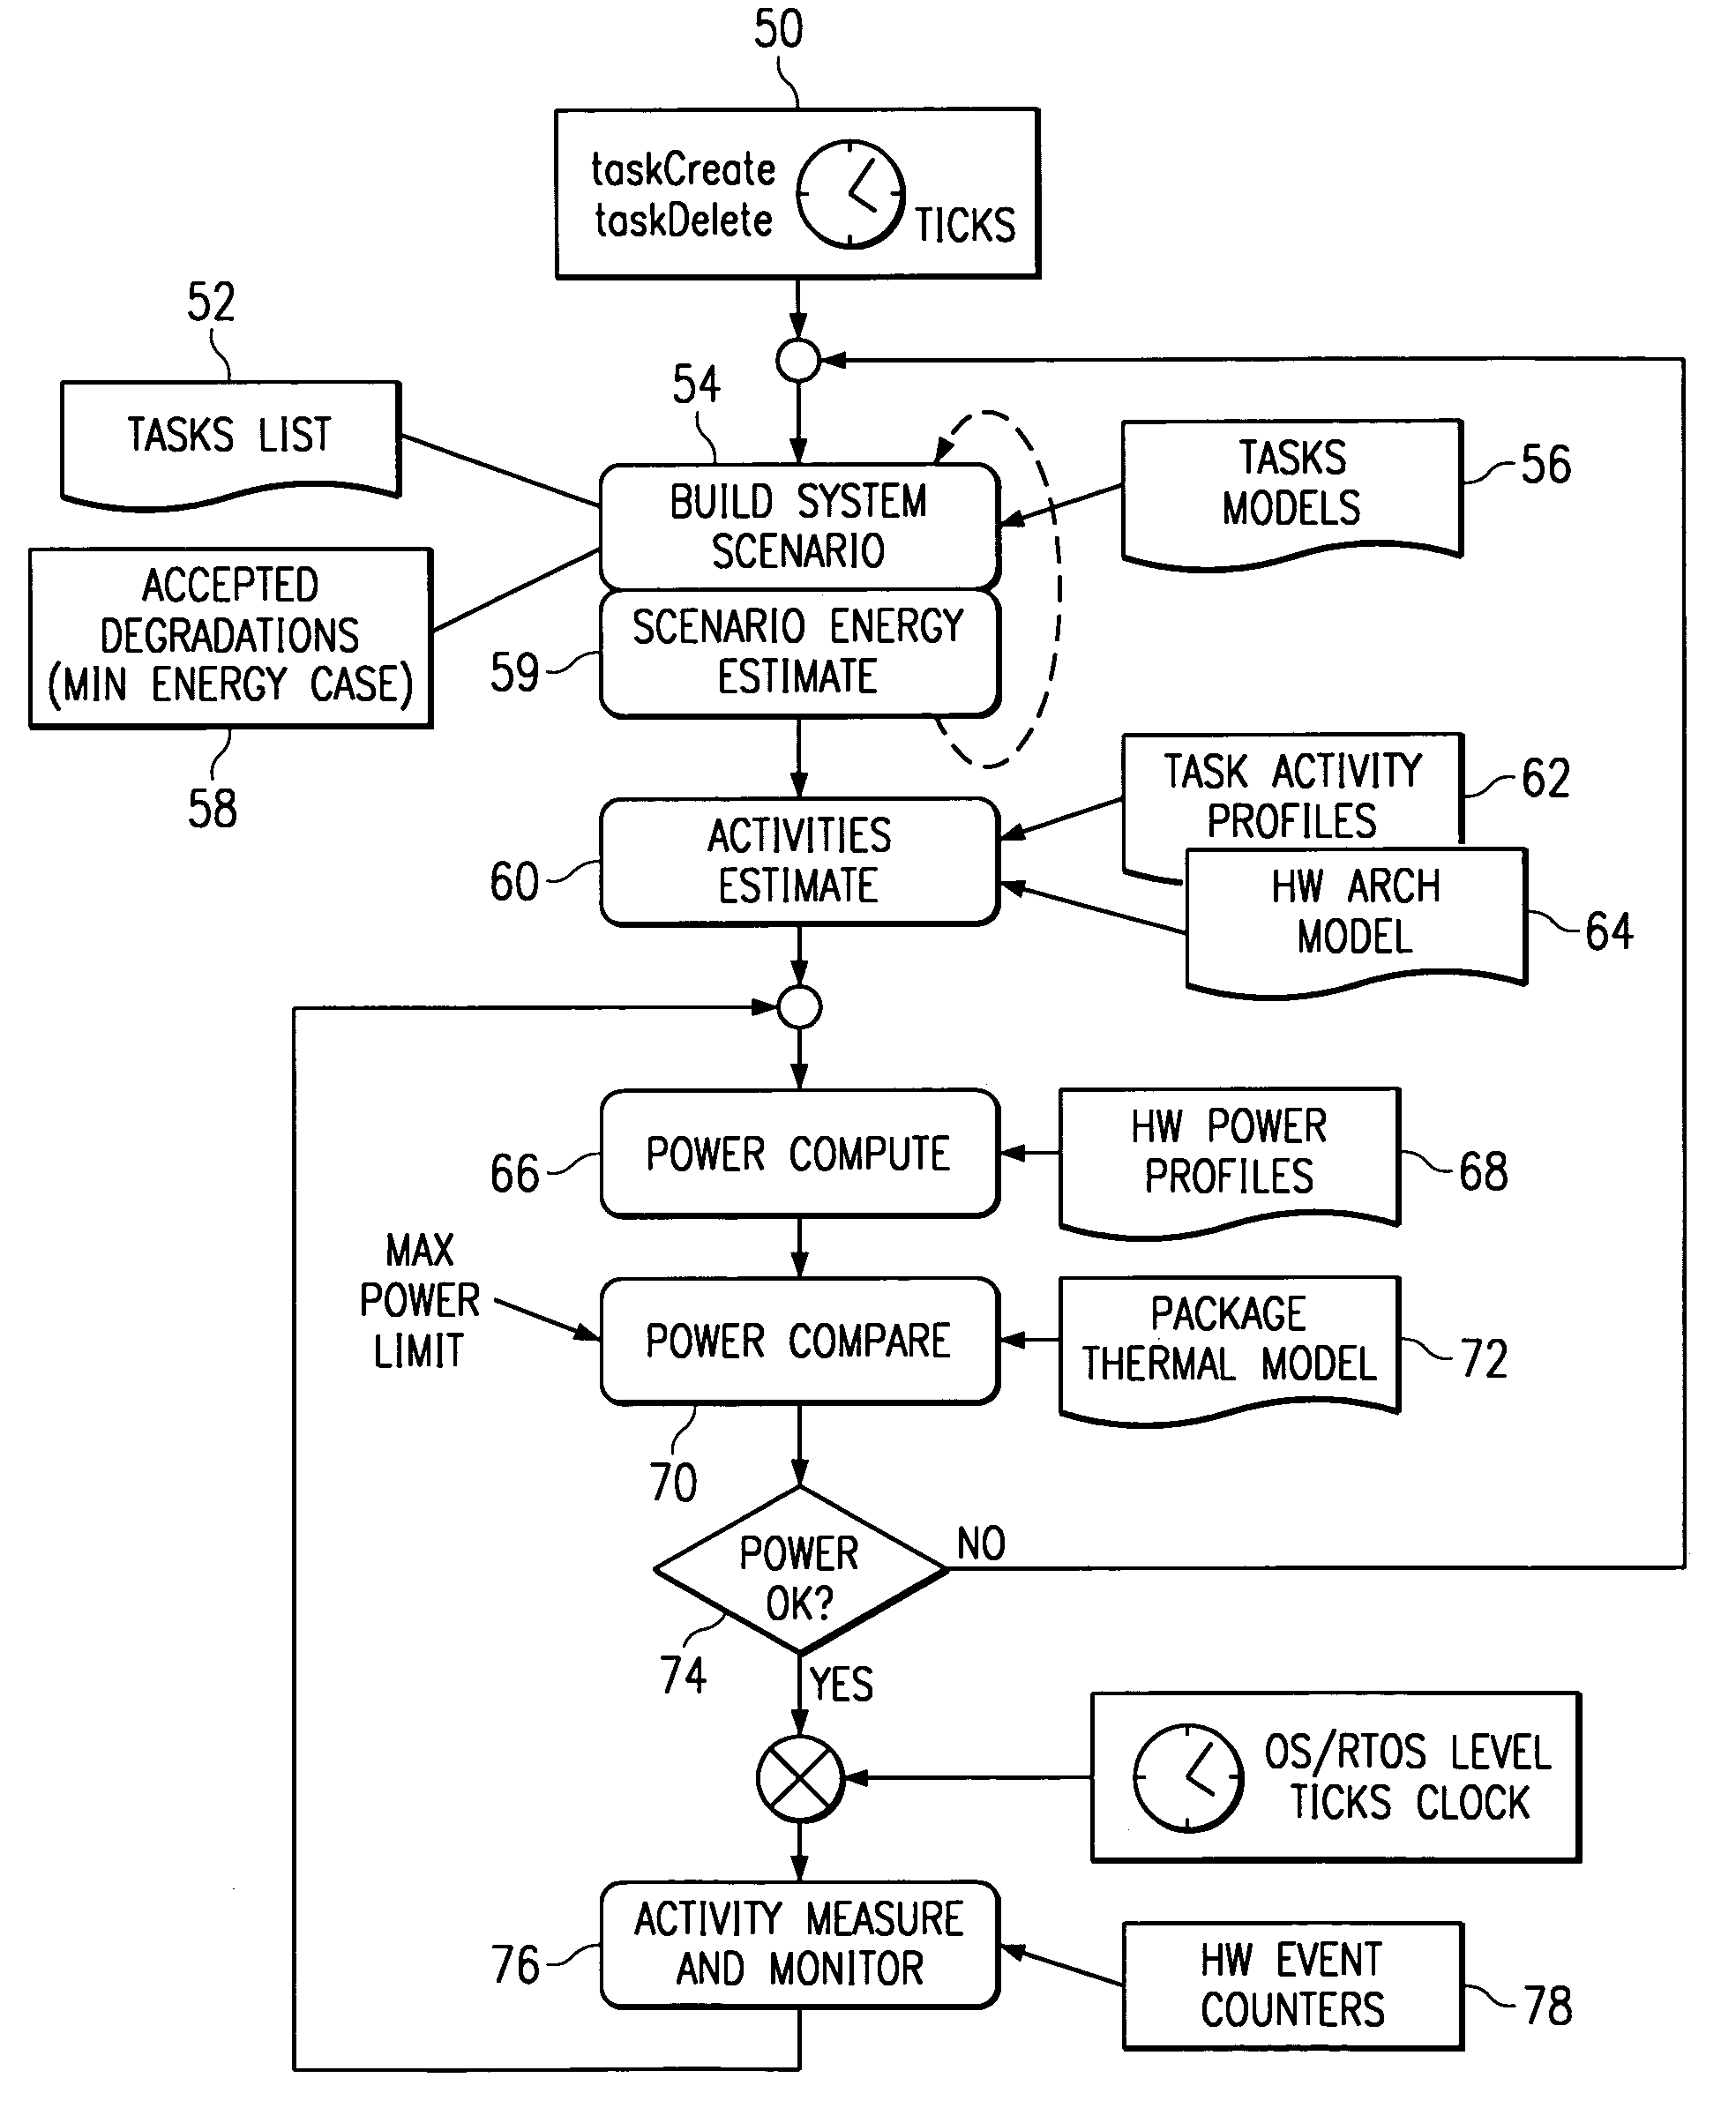 System and method for executing tasks according to a selected scenario in response to probabilistic power consumption information of each scenario